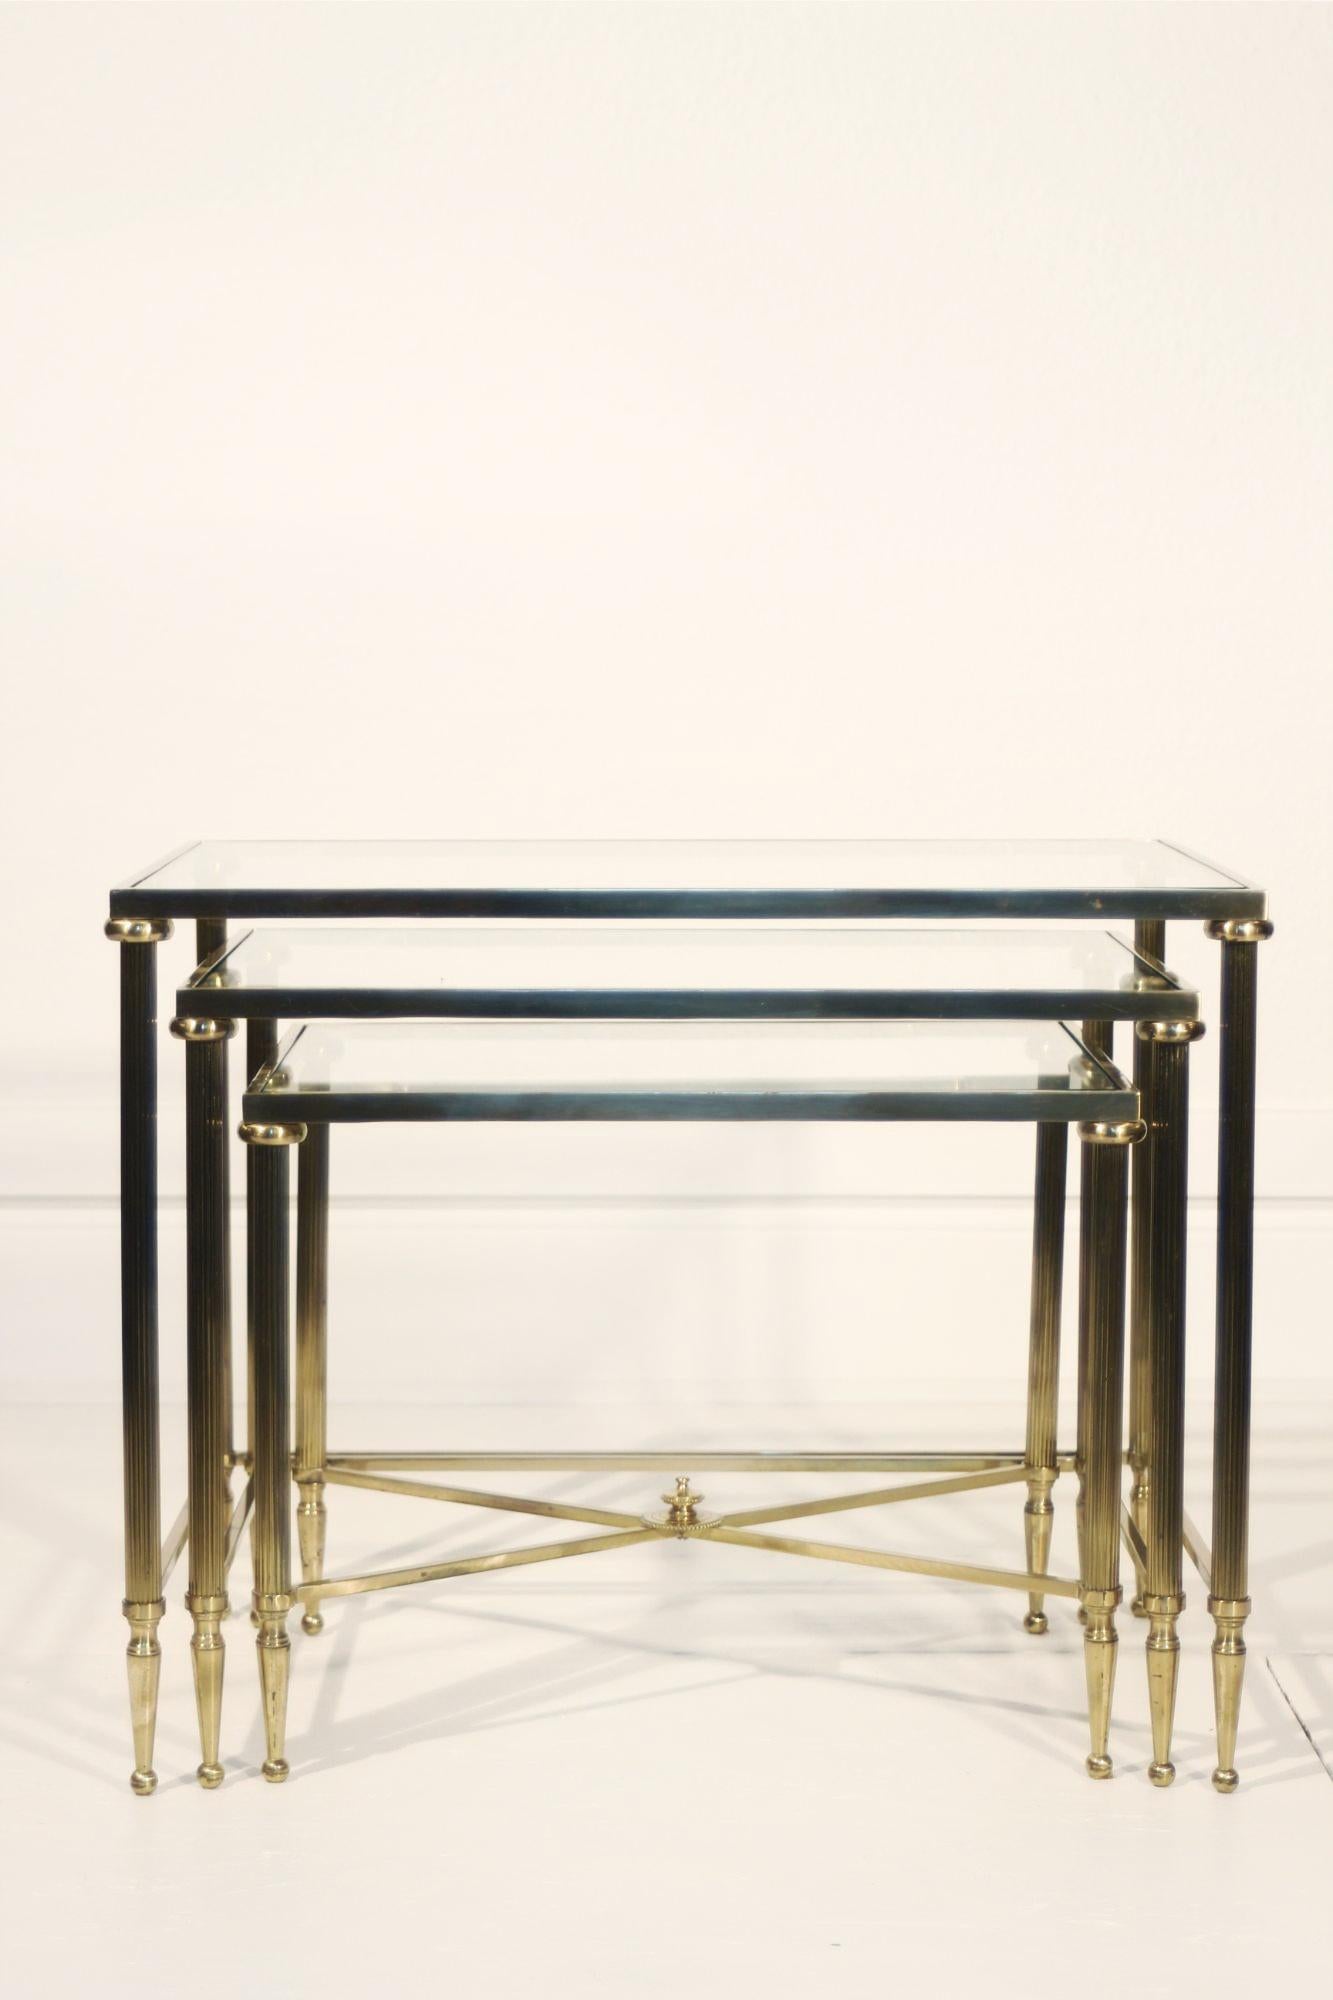 Mid-century nesting tables in gilded brass and tempered glass, attributed to the famous French furniture maker Maison Jansen, known for making high quality pieces of furniture popular in Parisian interiors of the time. 

The design is typical of the